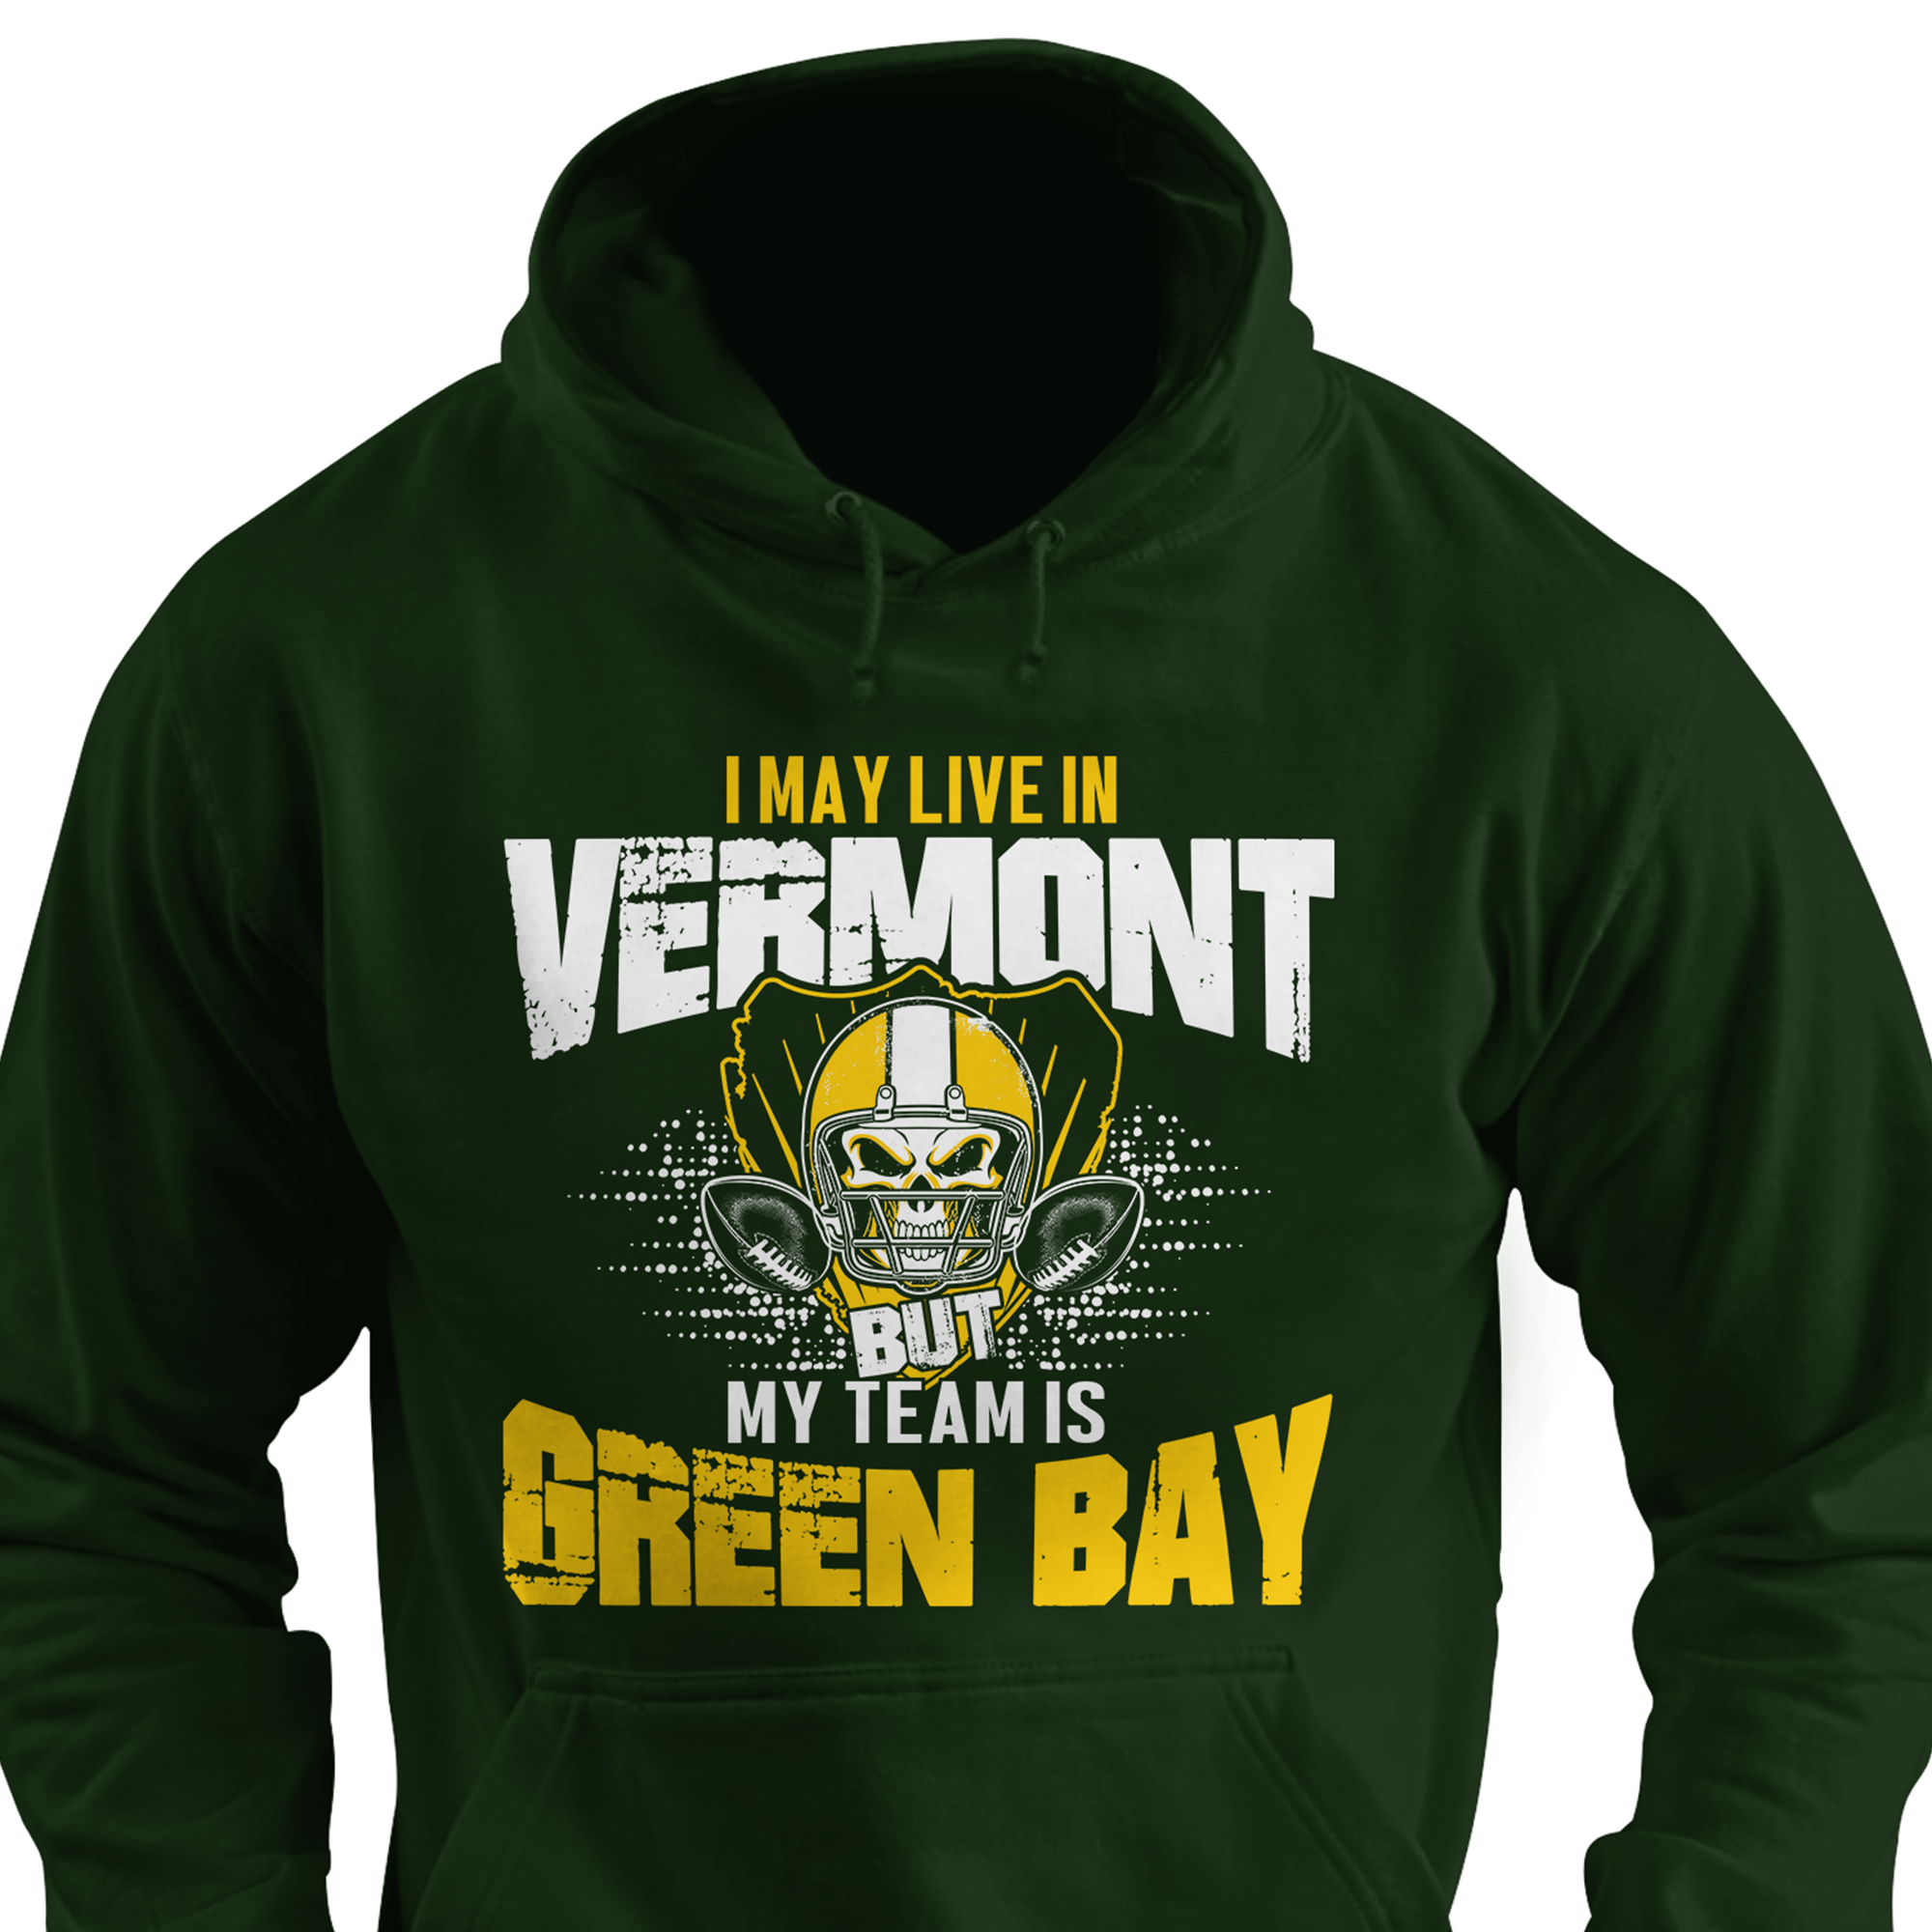 I May Live in Vermont but My Team is Green Bay